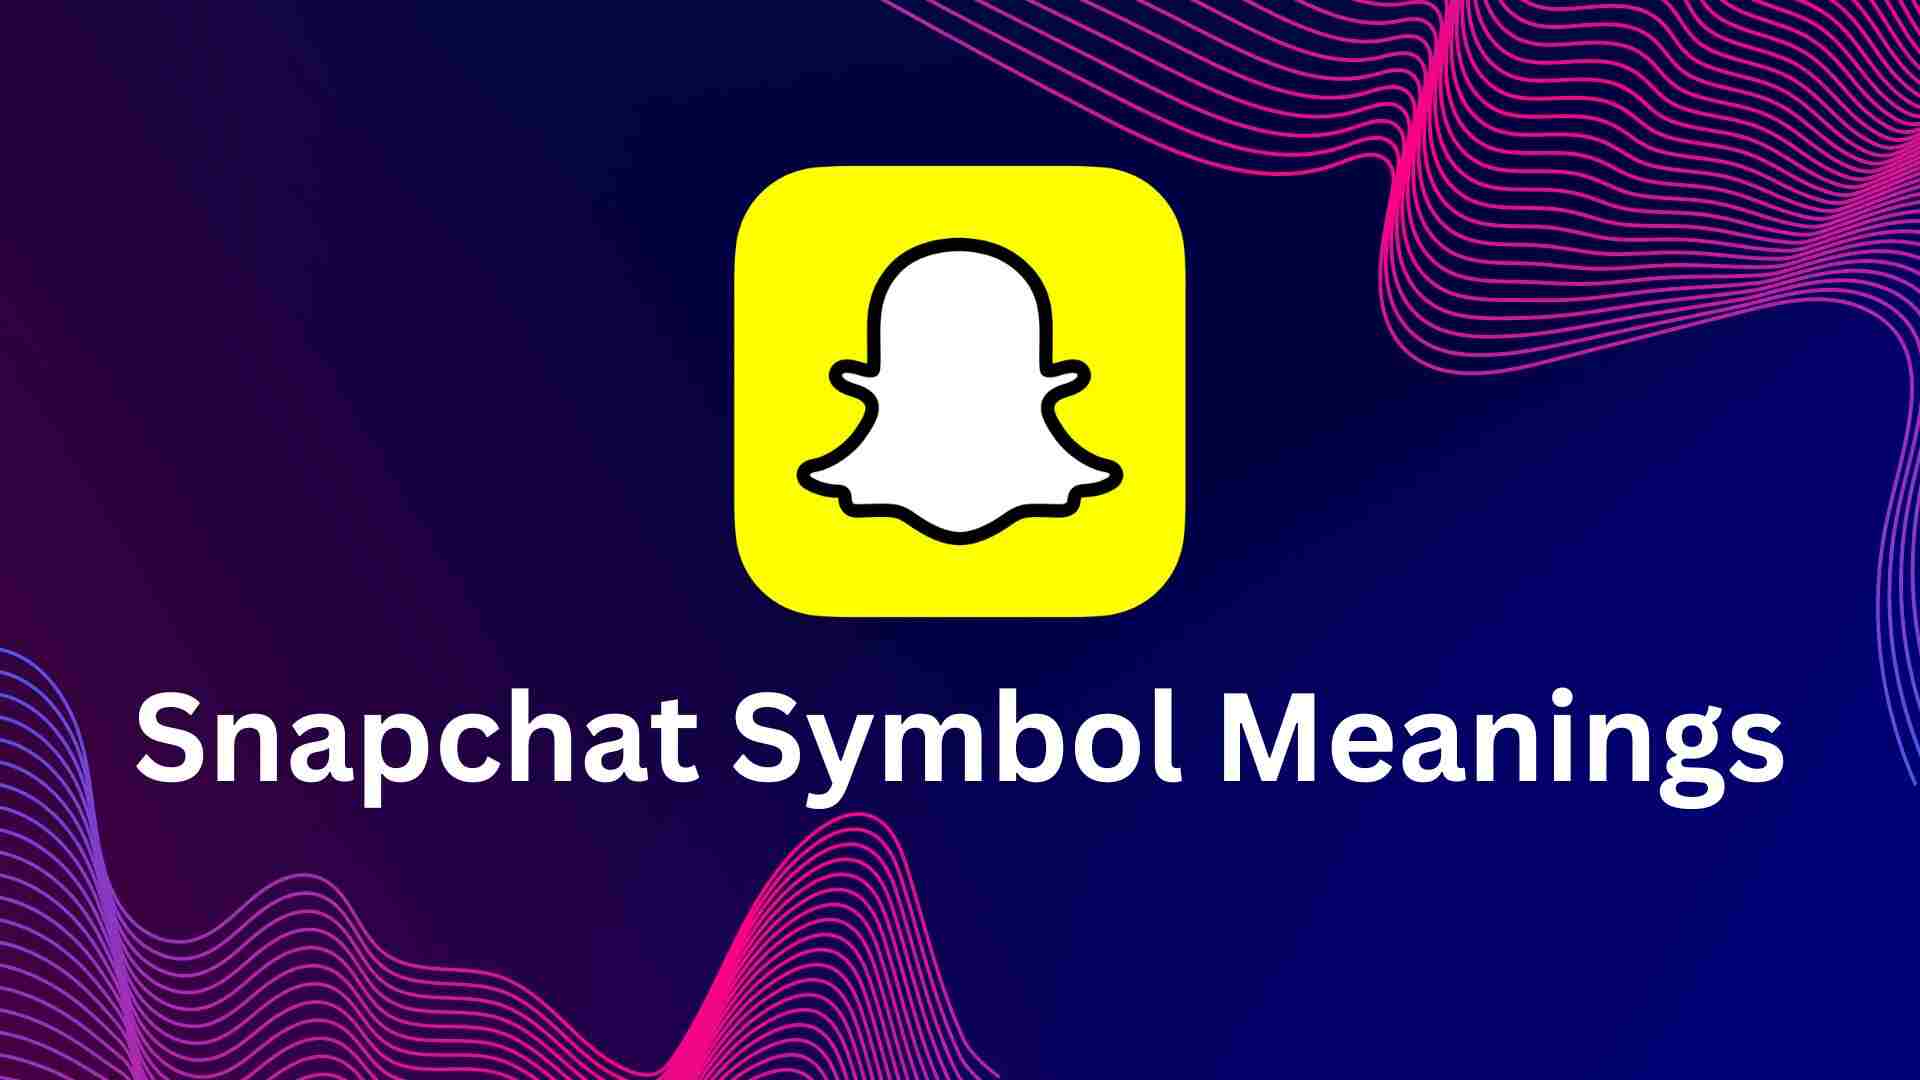 Snapchat Symbol Meanings